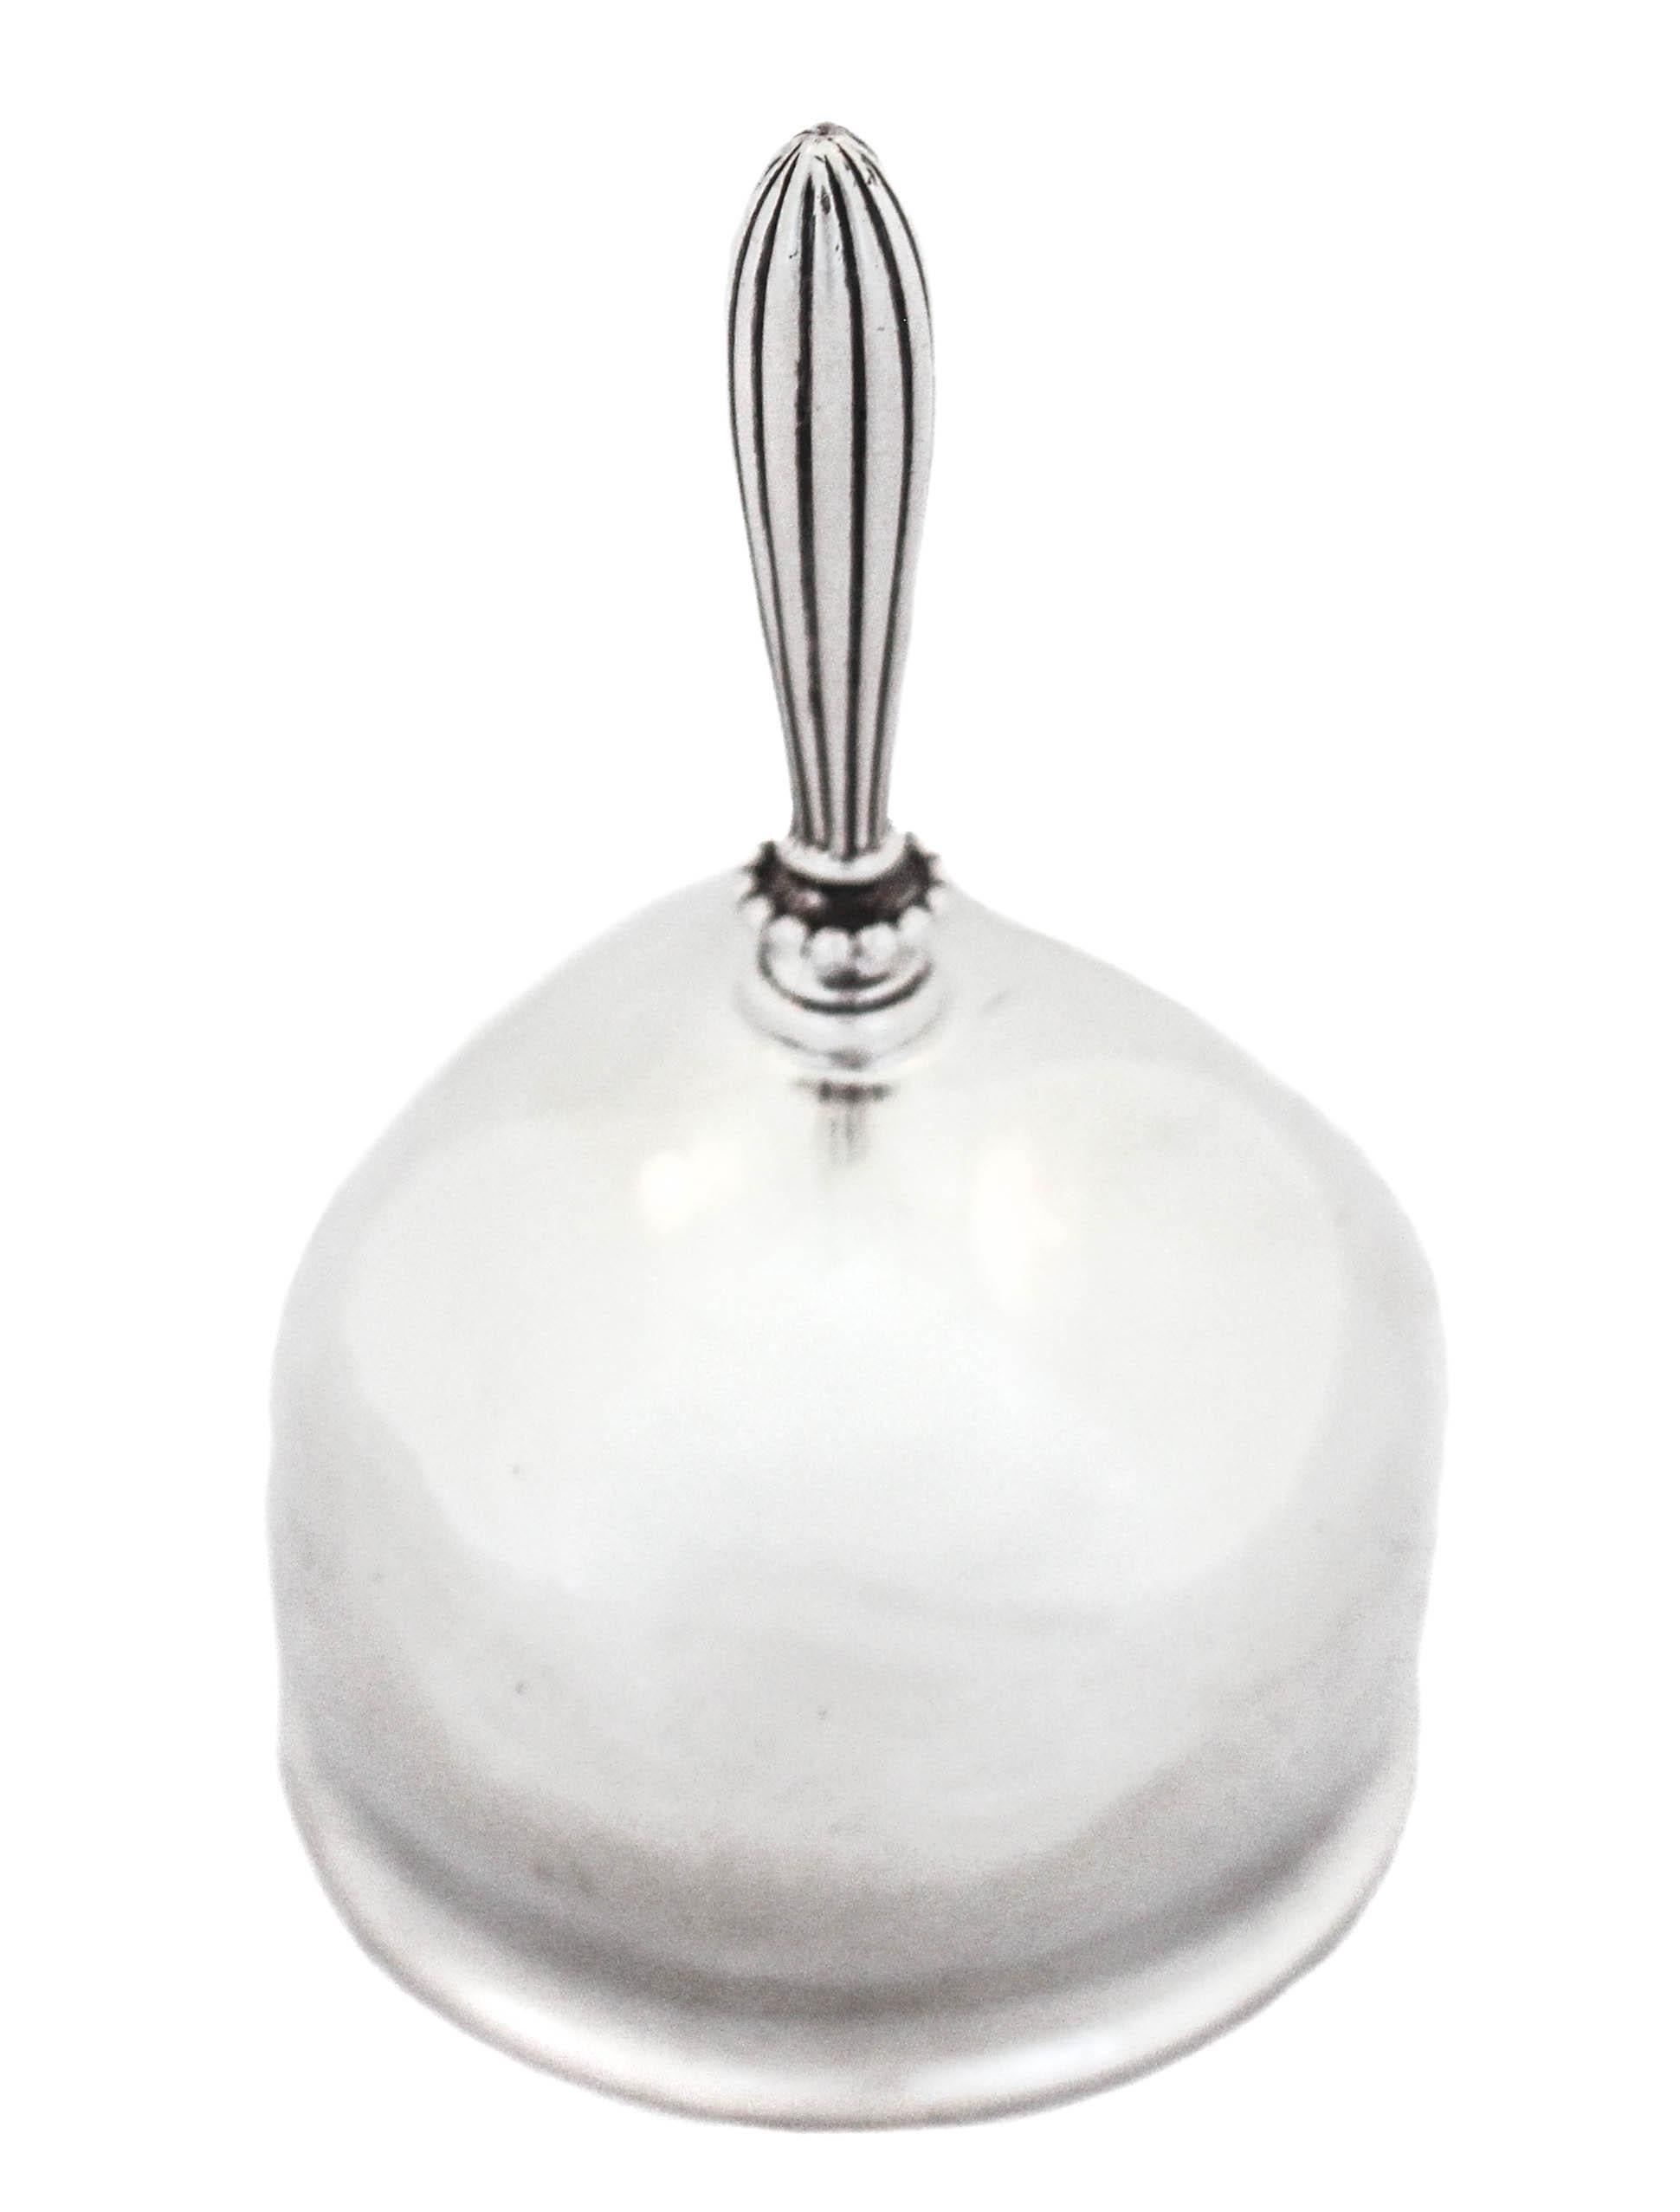 Rare sterling silver bell by Tiffany and Company. A great way to get peoples attention or to silence a rowdy crowd, this bell is loud and clear!! Simple design on the handle and no monogram.